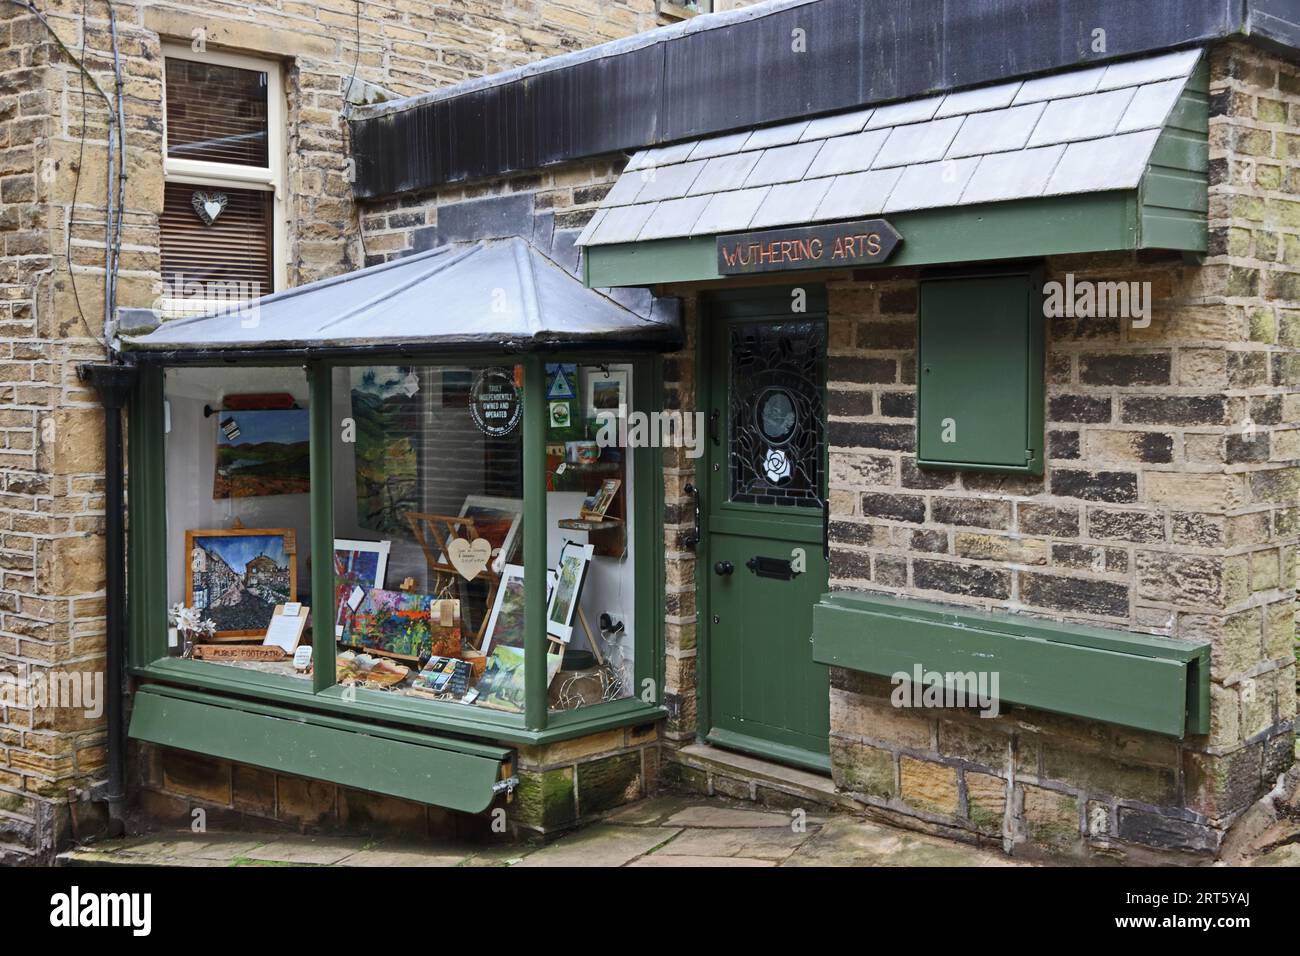 Boutique Wuthering Arts, Haworth Banque D'Images